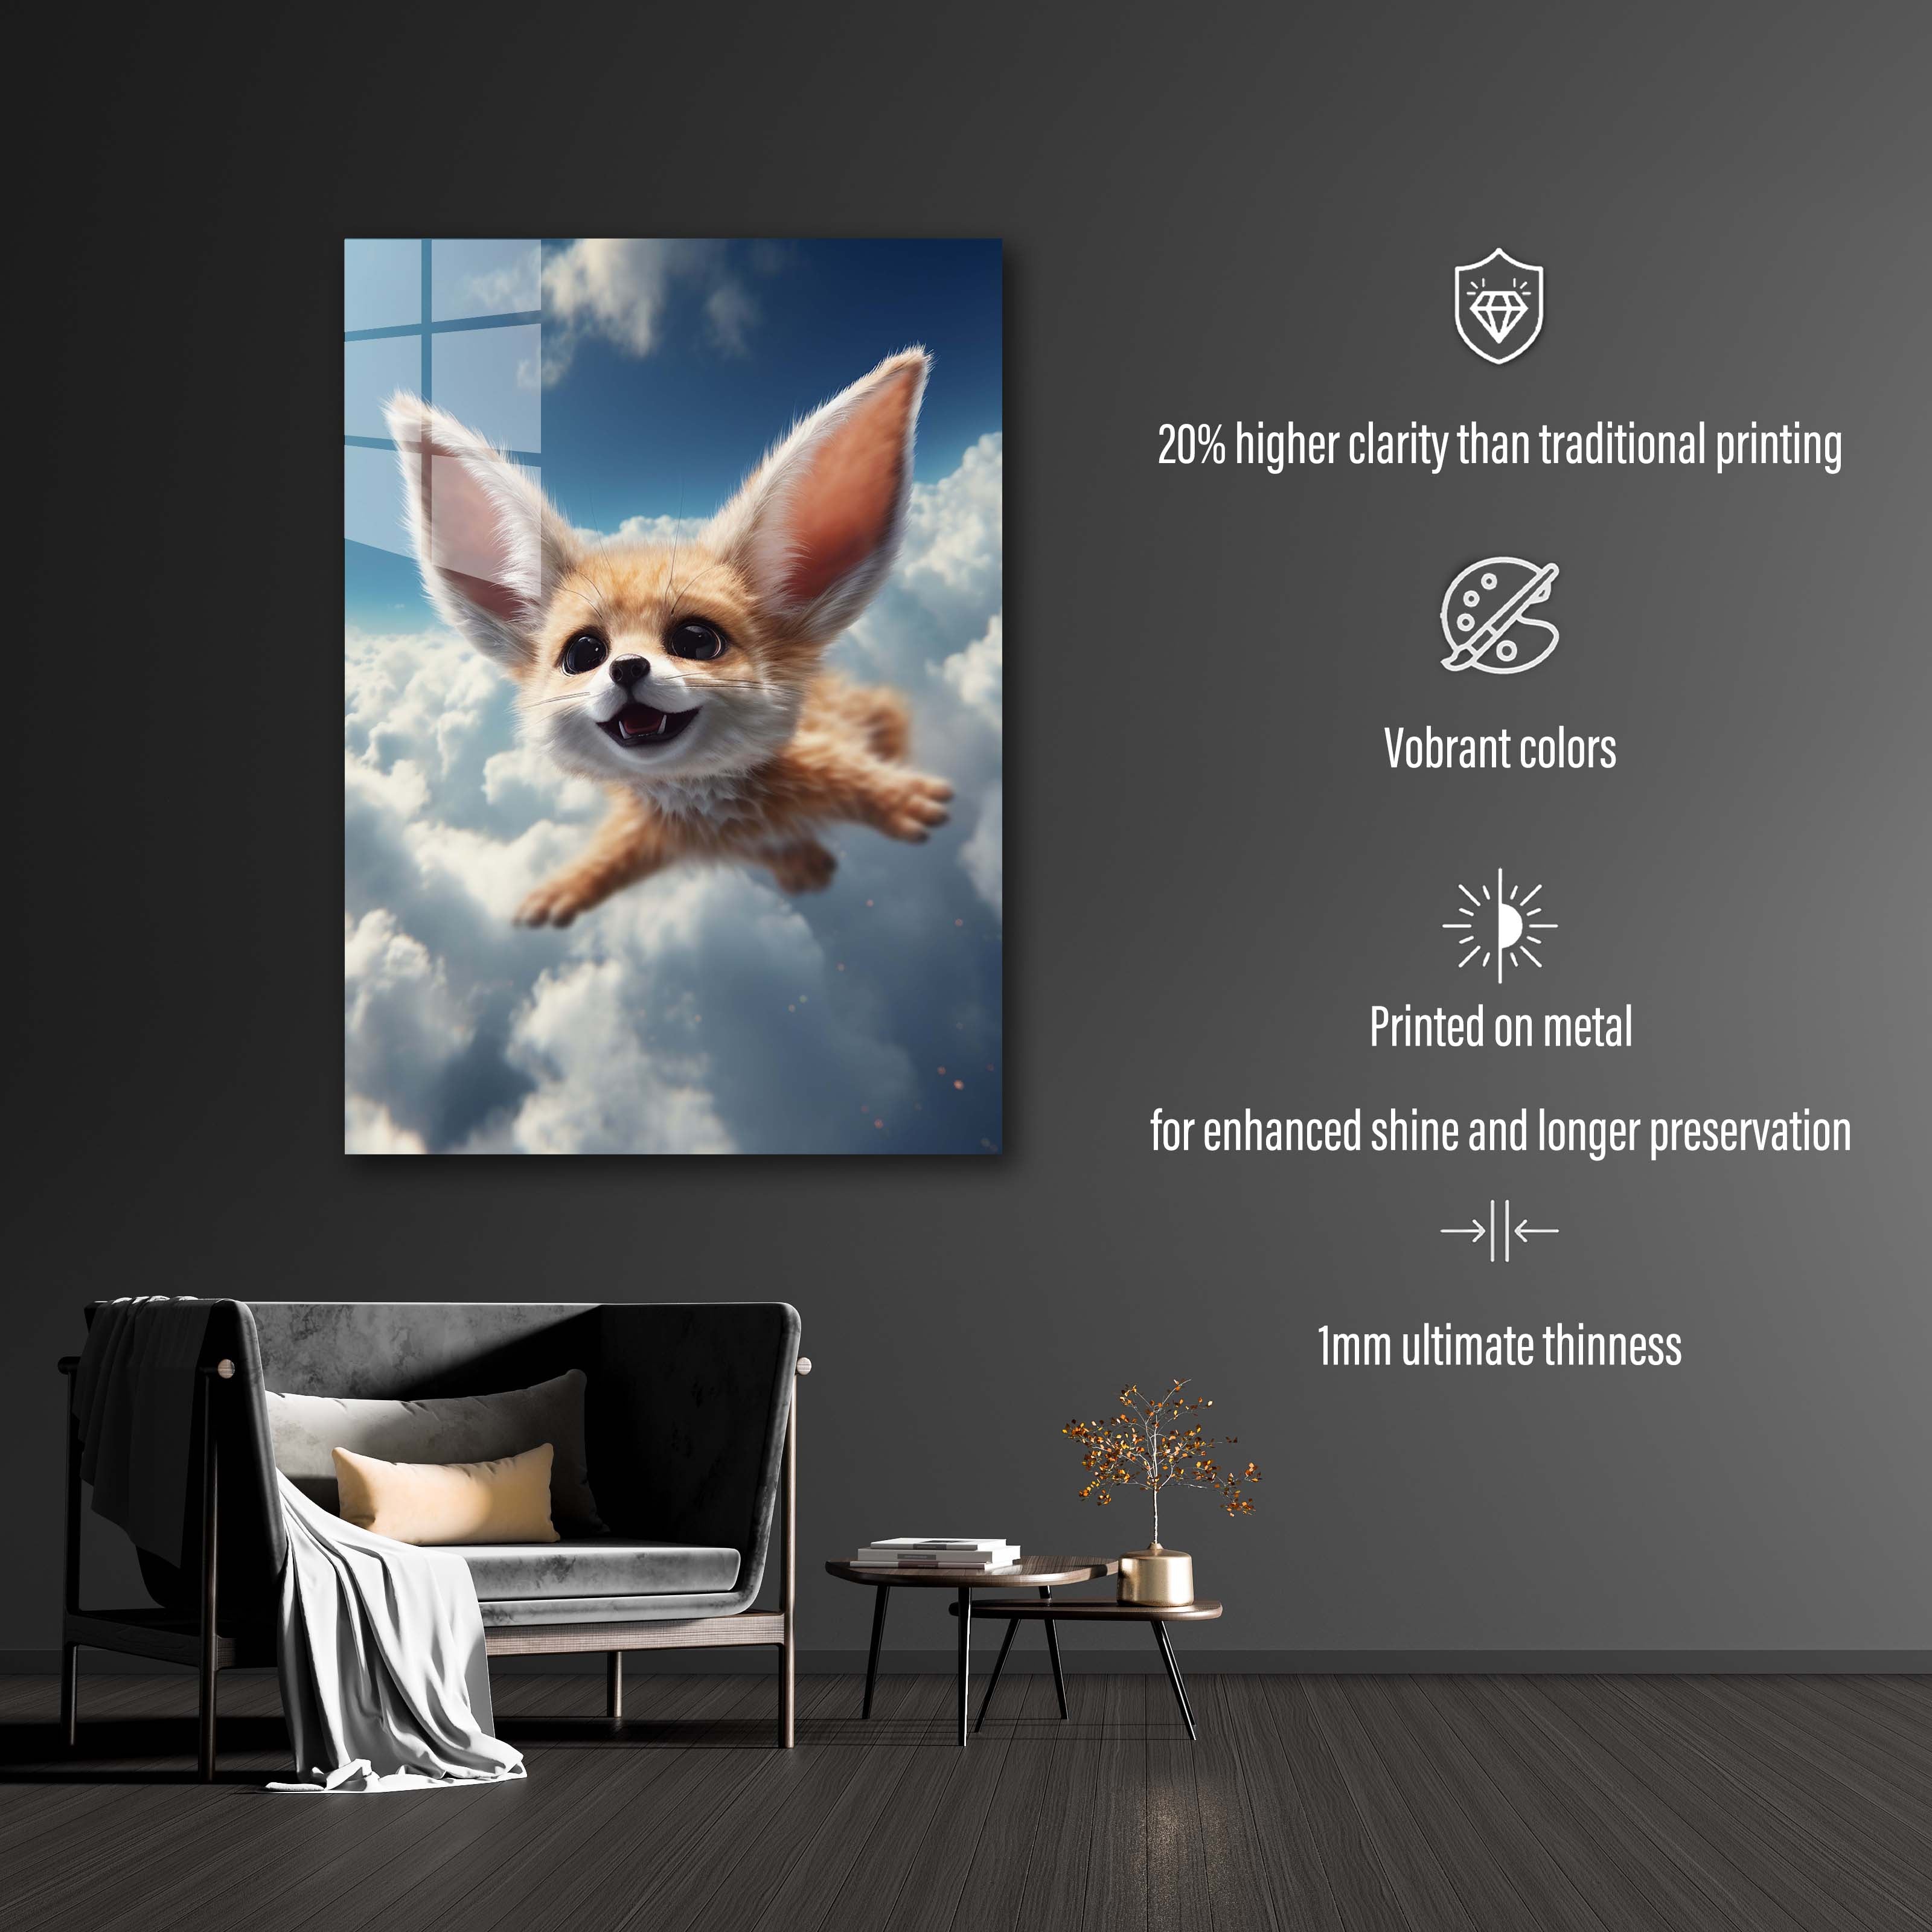 Fly Fennec-designed by @Mbaka.ai